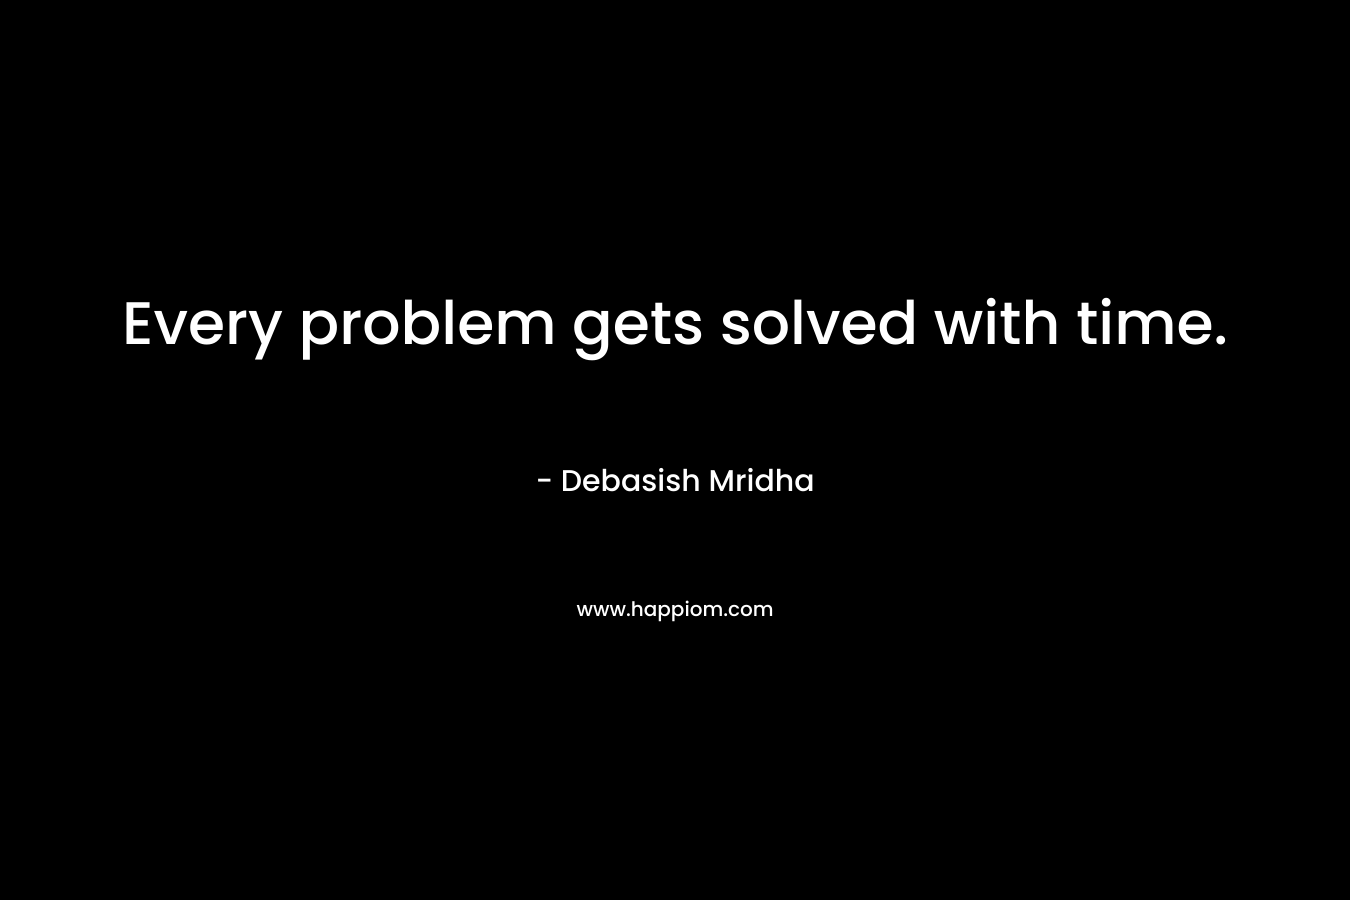 Every problem gets solved with time.